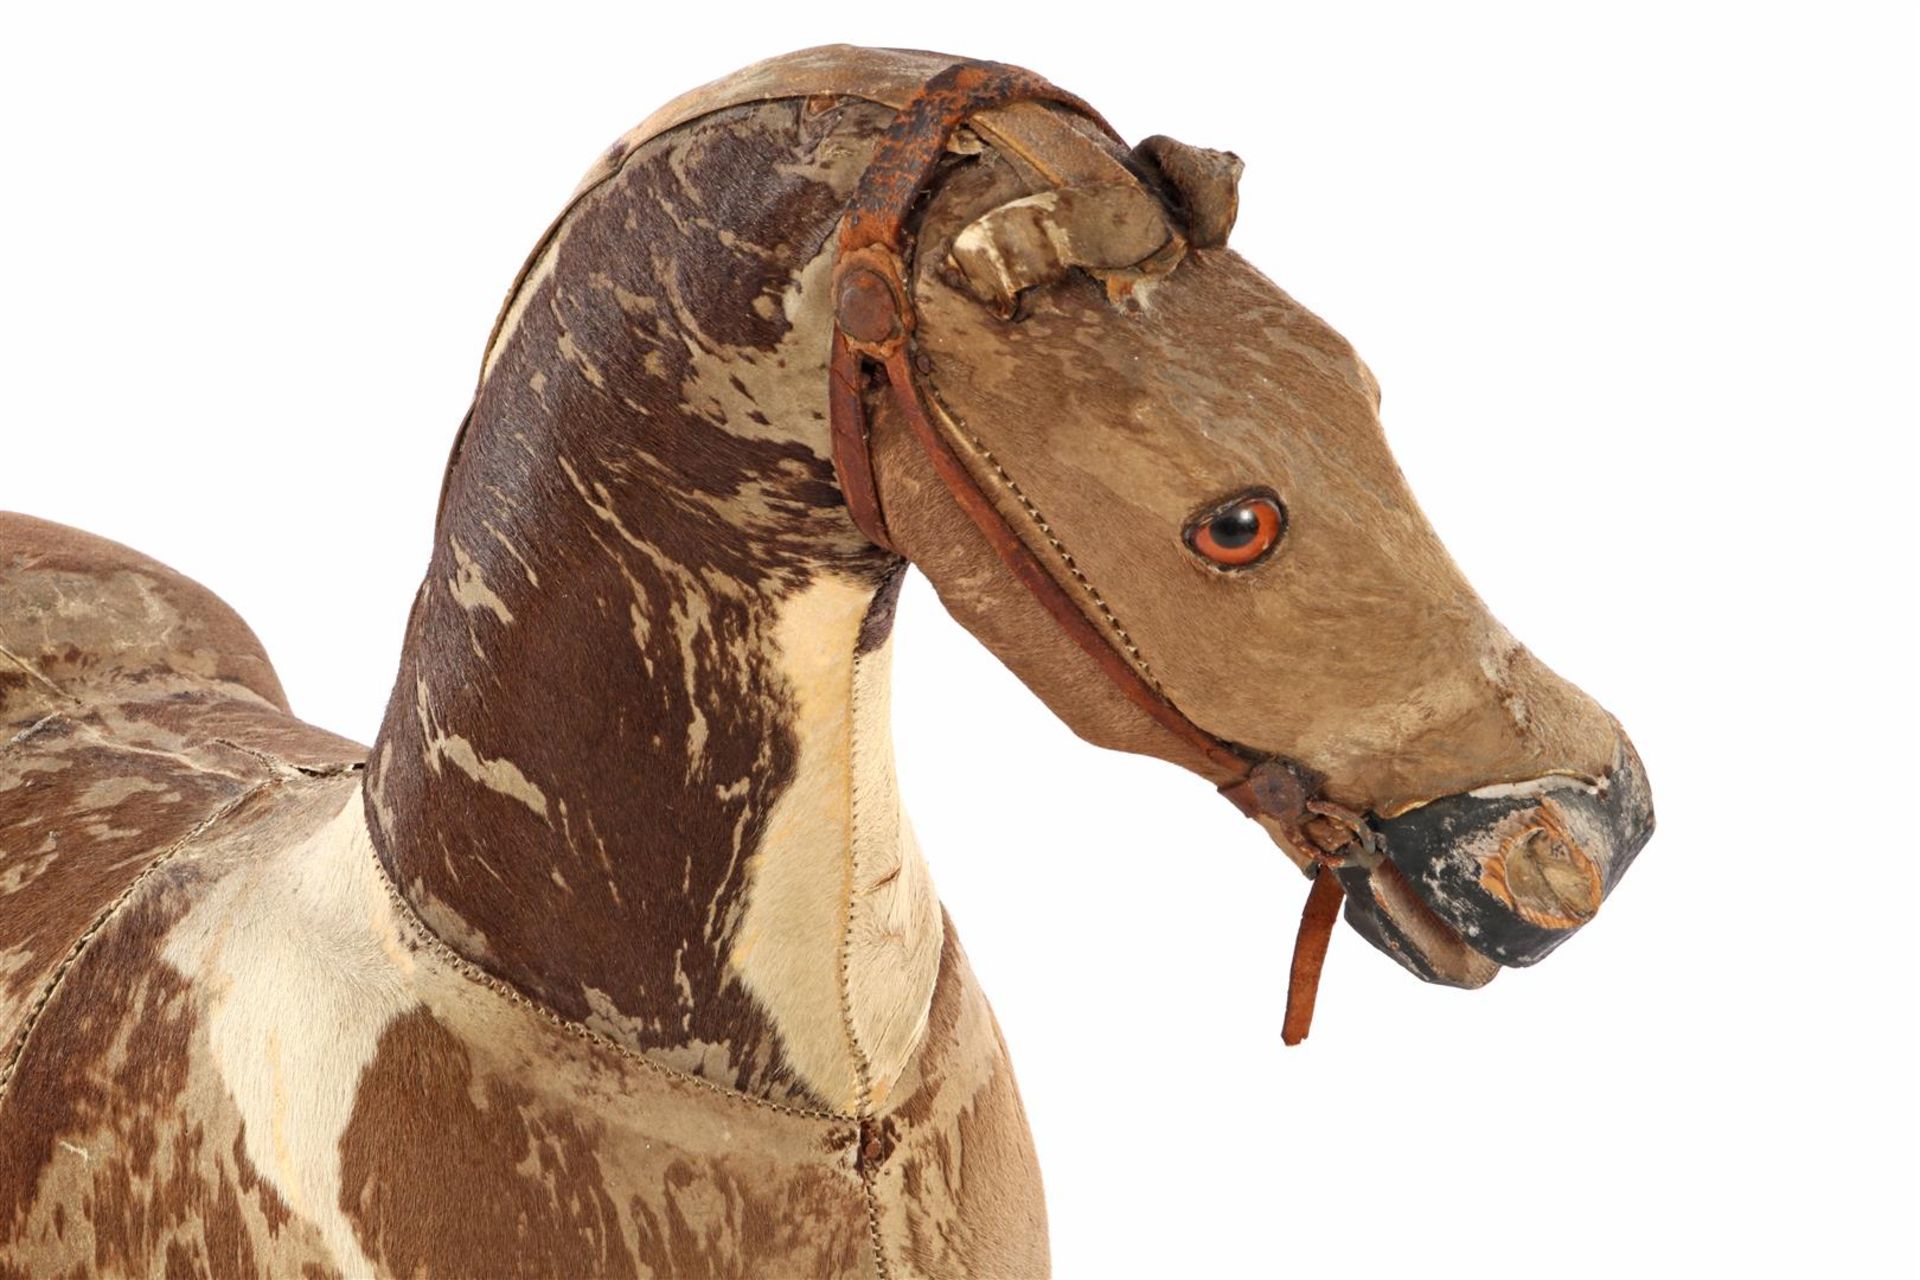 Victorian toy horse - Image 3 of 4